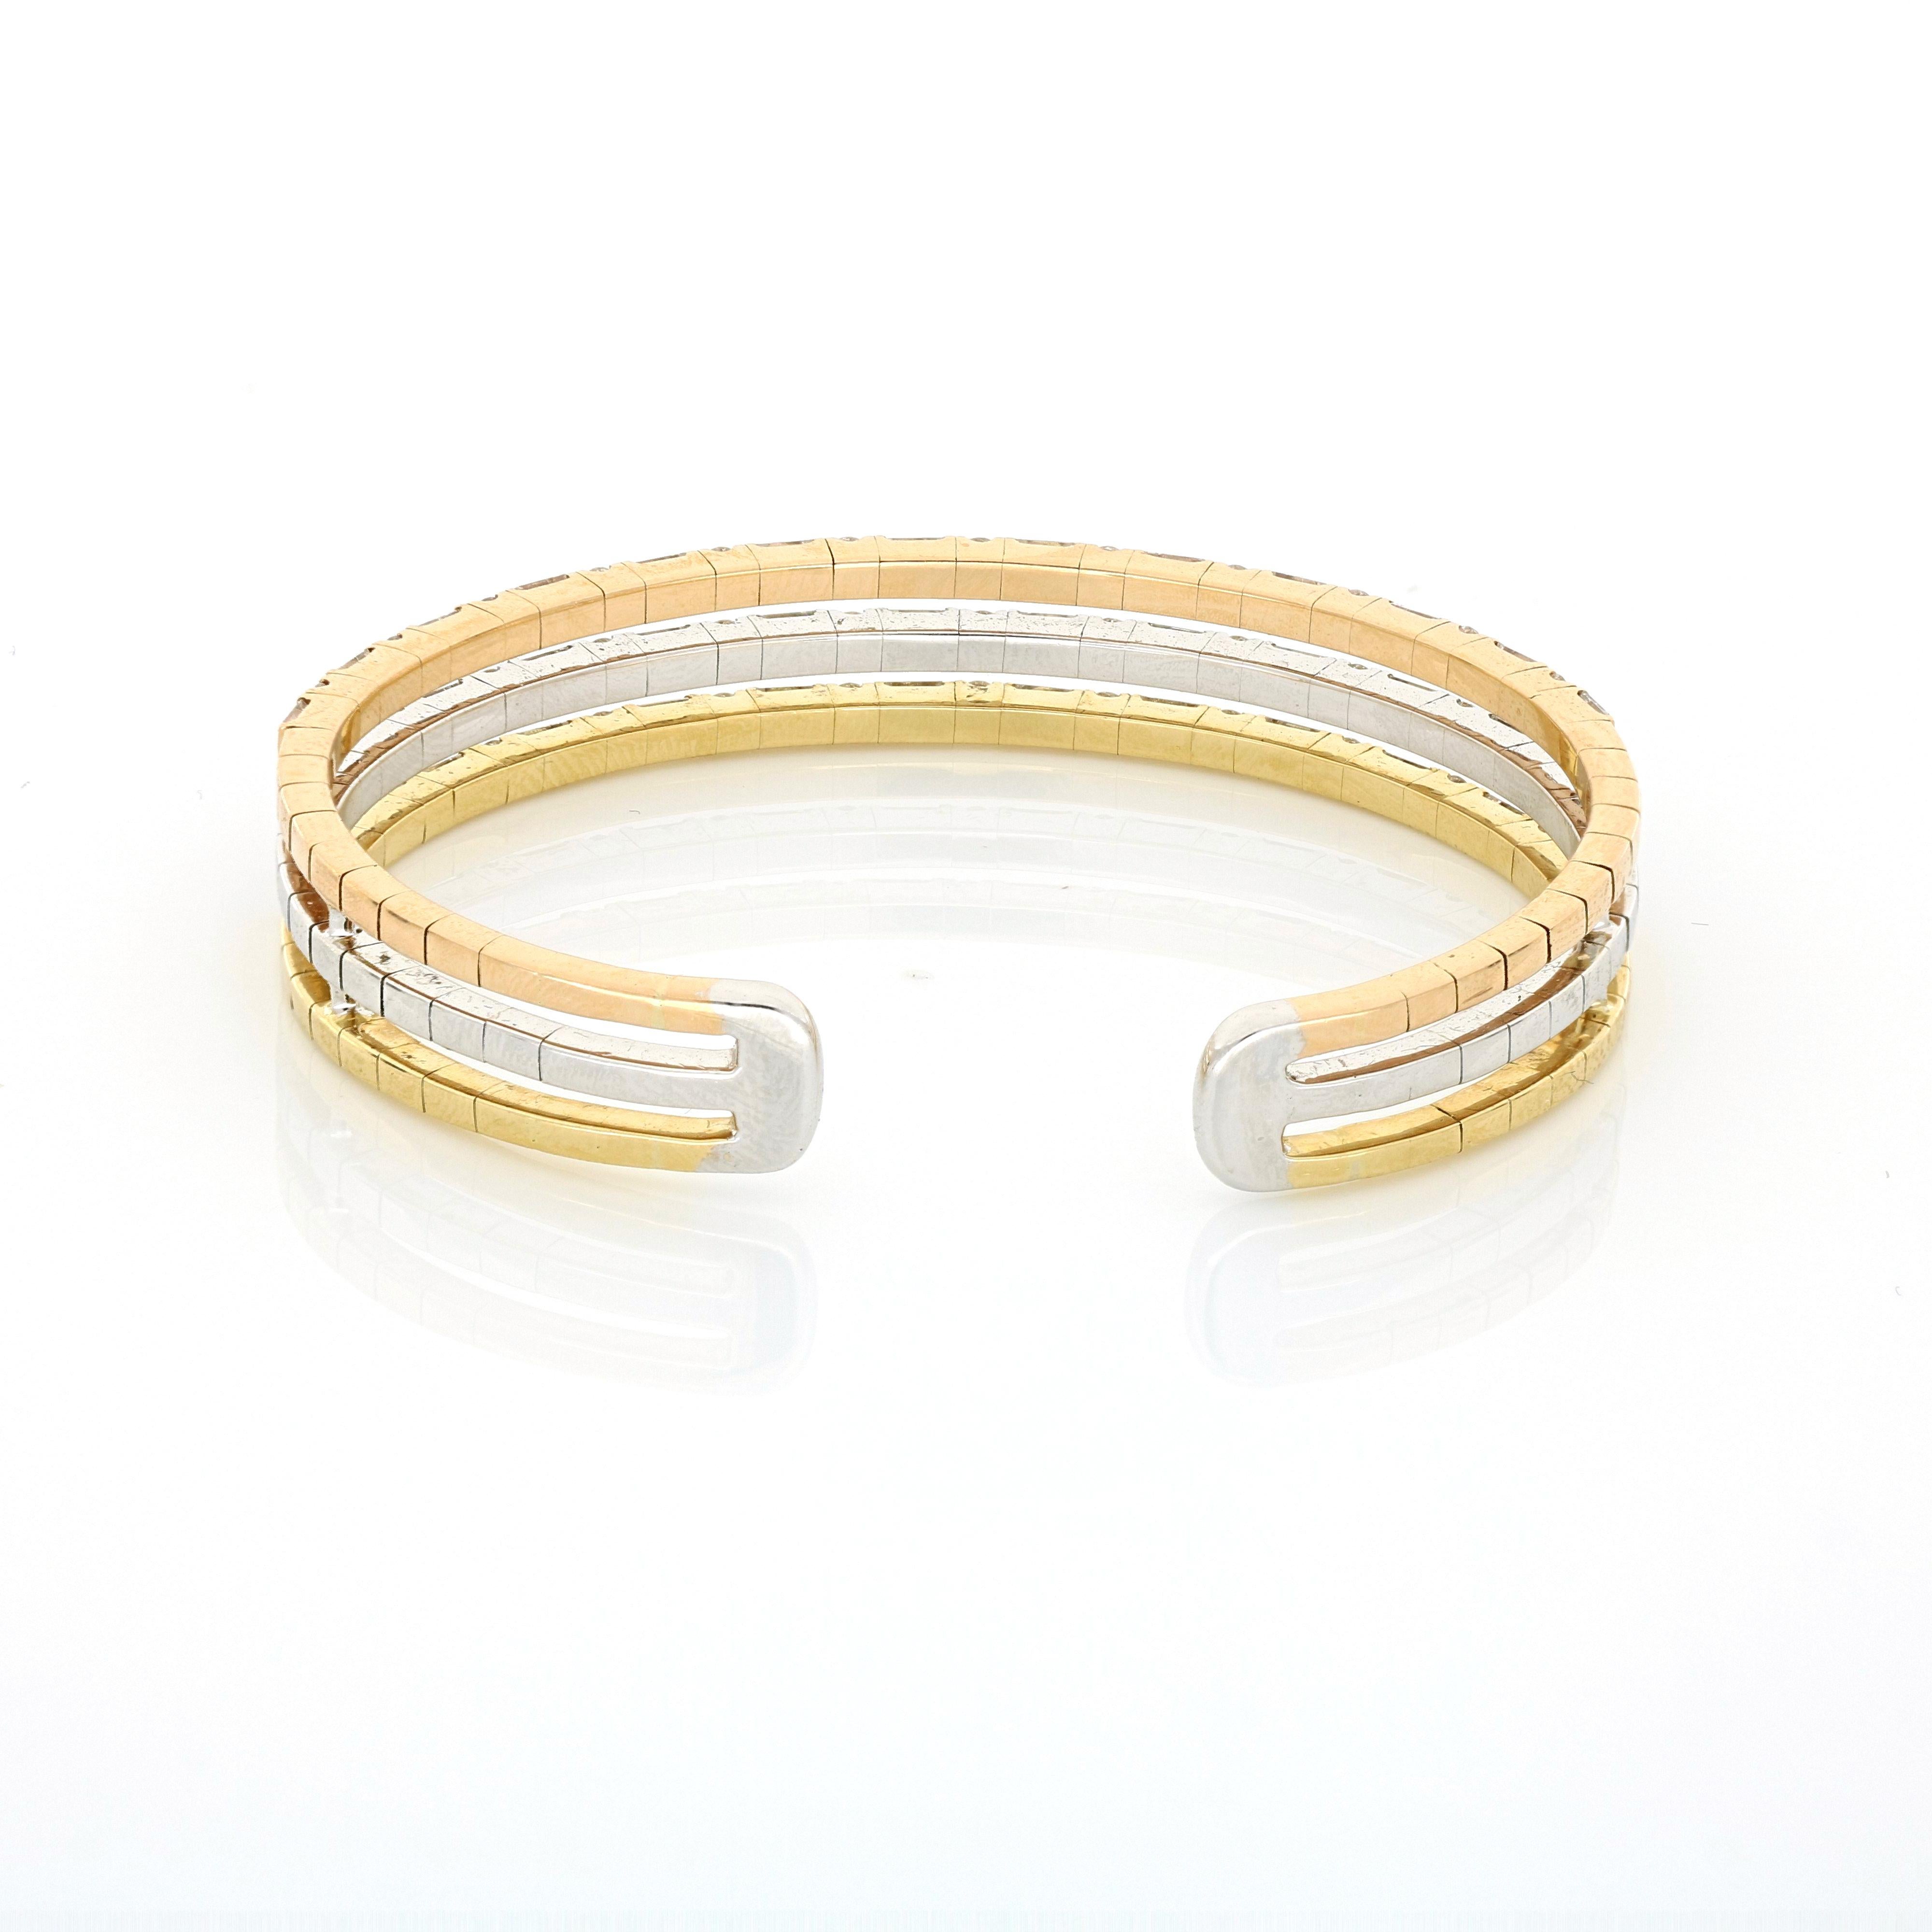 A remarkable bracelet with a magnificent 24.86 karat of multi-colored gold, framed by 3 layers of 3.15 carat of the finest baguette and round cut. Amwaj extraordinary cutting and polishing skills are showcased in the sleek, delicate silhouette of